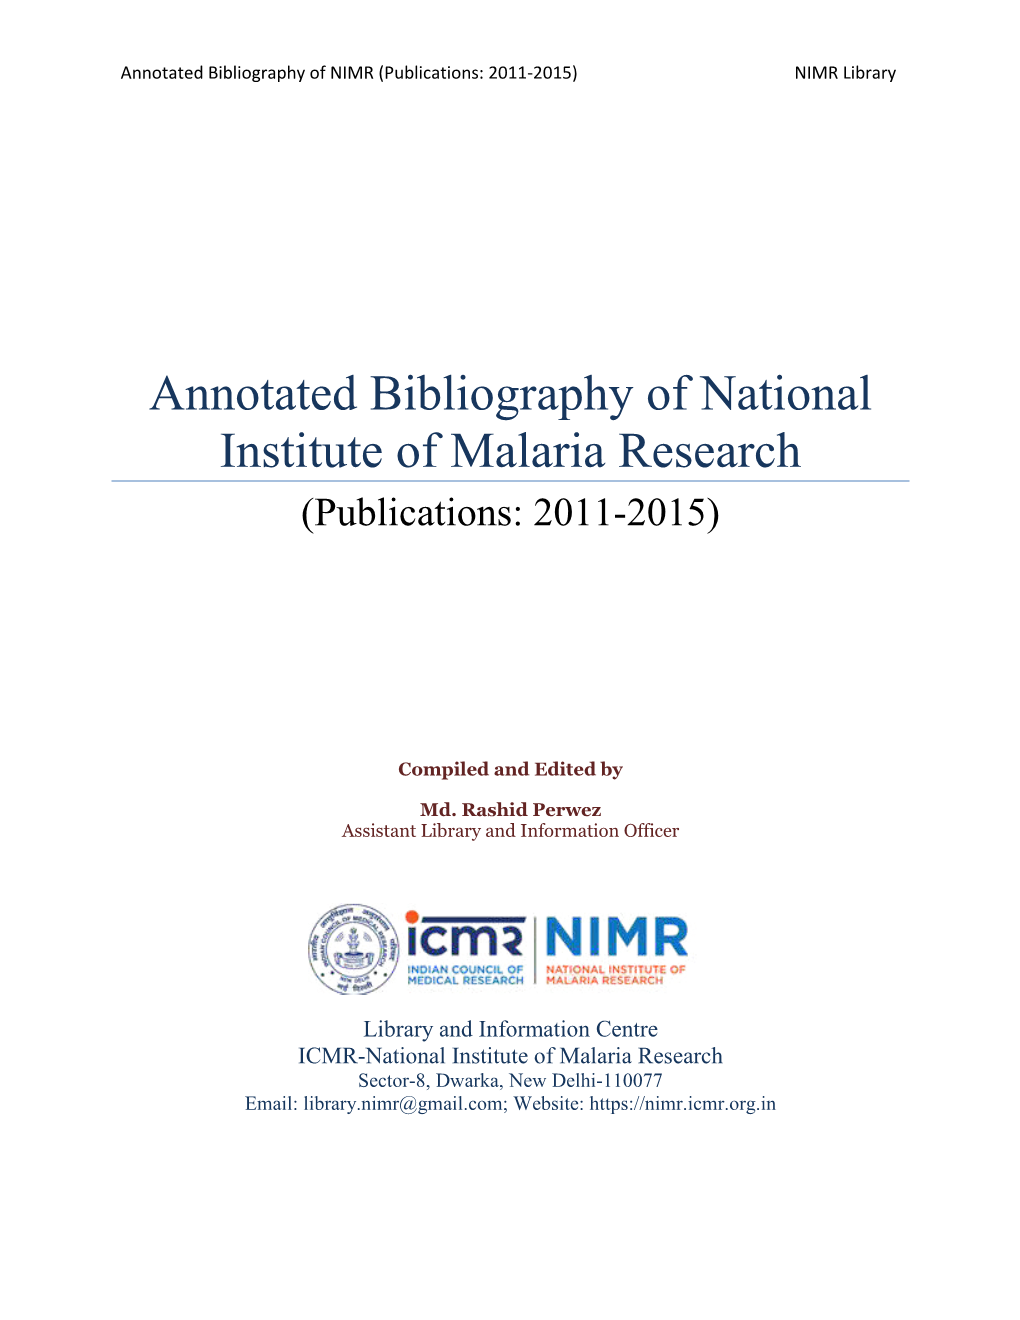 Annotated Bibliography of National Institute of Malaria Research (Publications: 2011-2015)